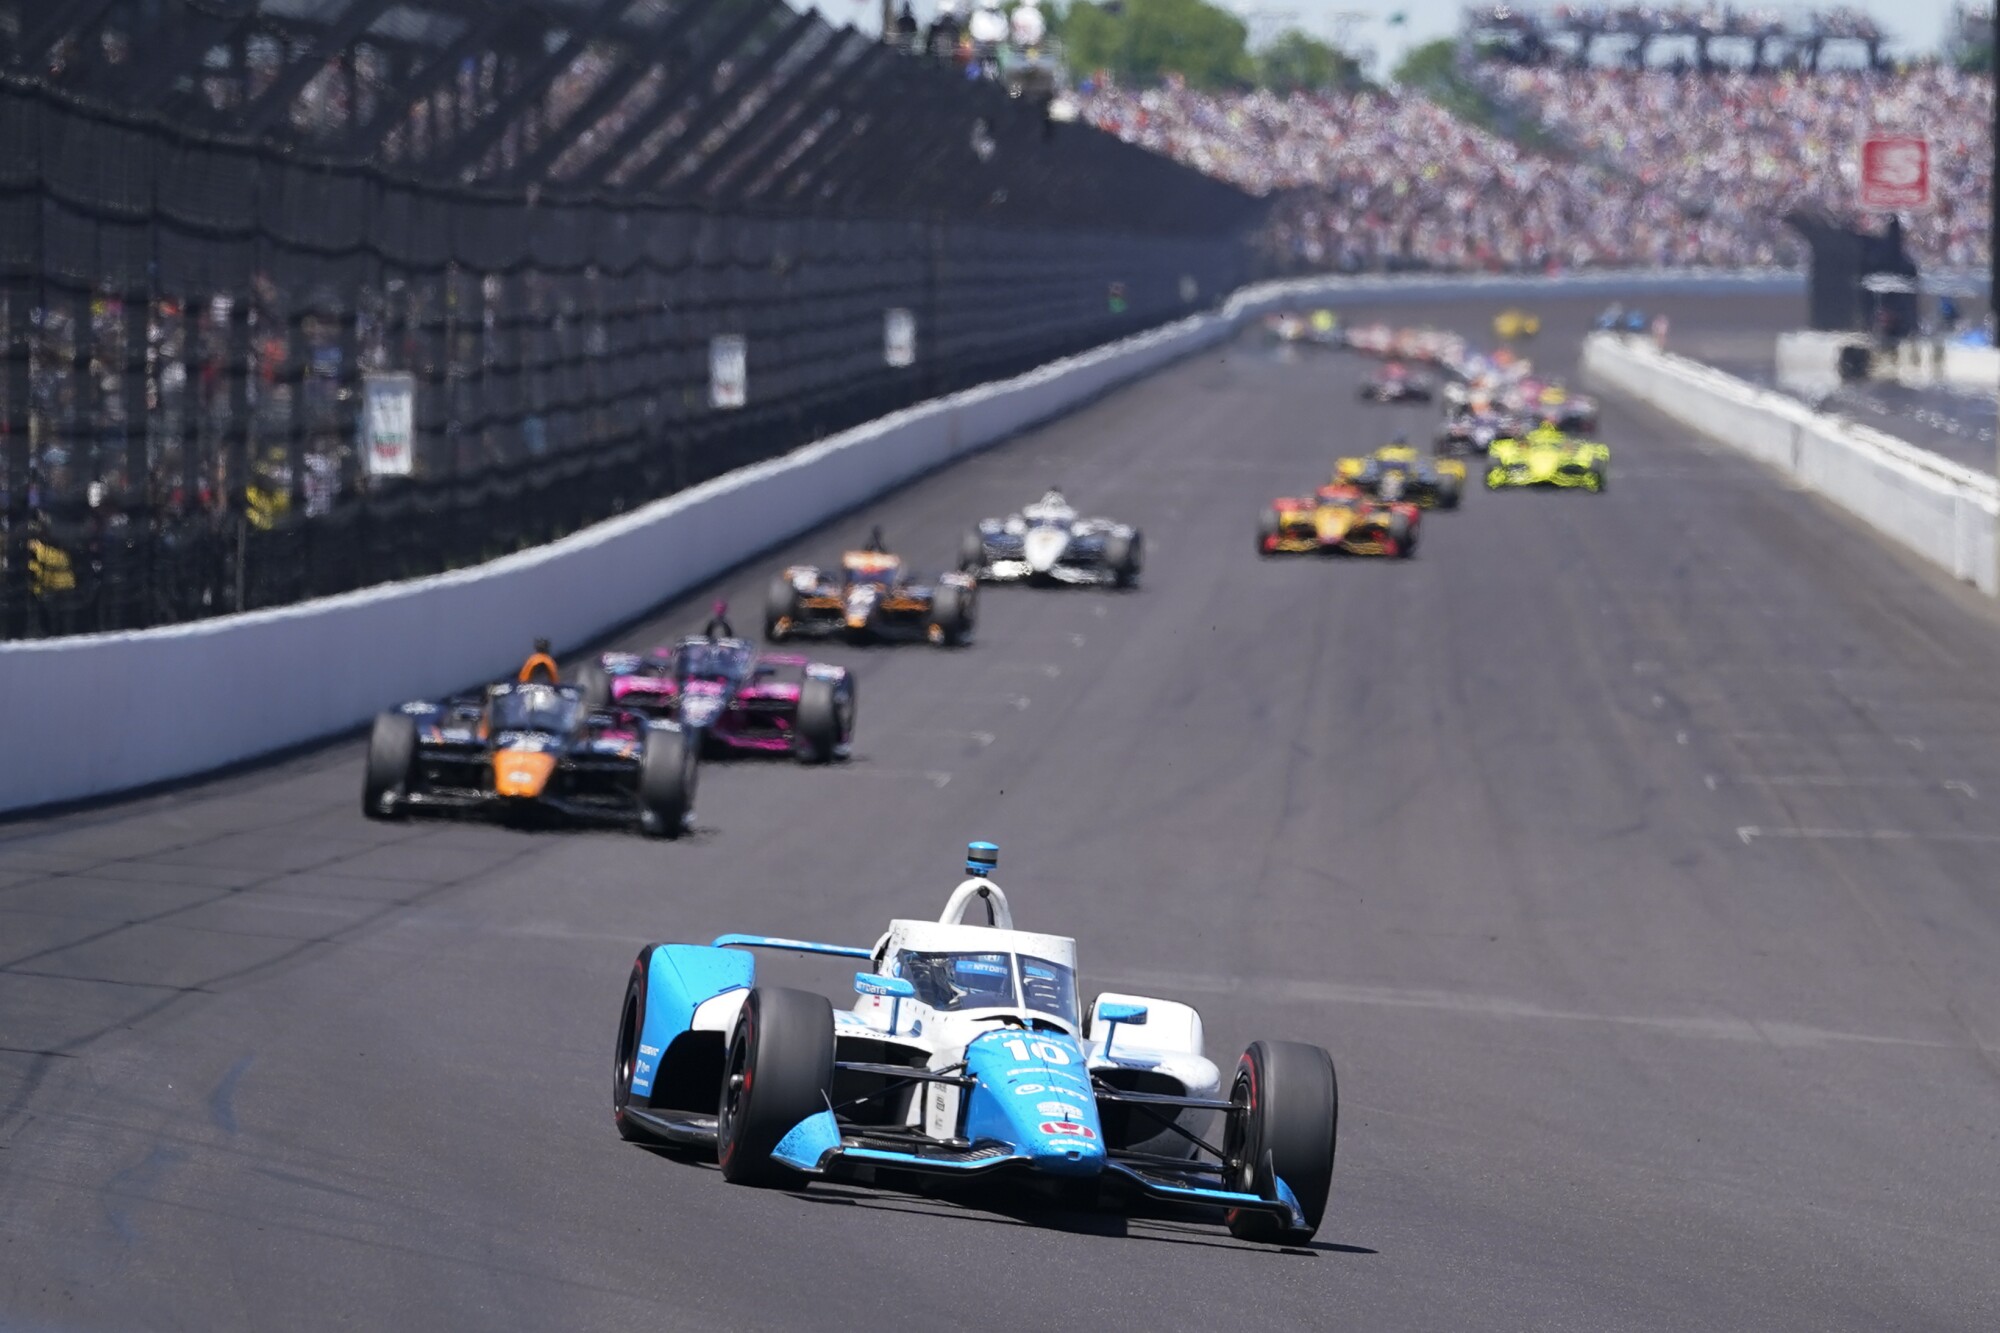 Alex Palou goes to the 1st turn during the 2021 Indianapolis 500.